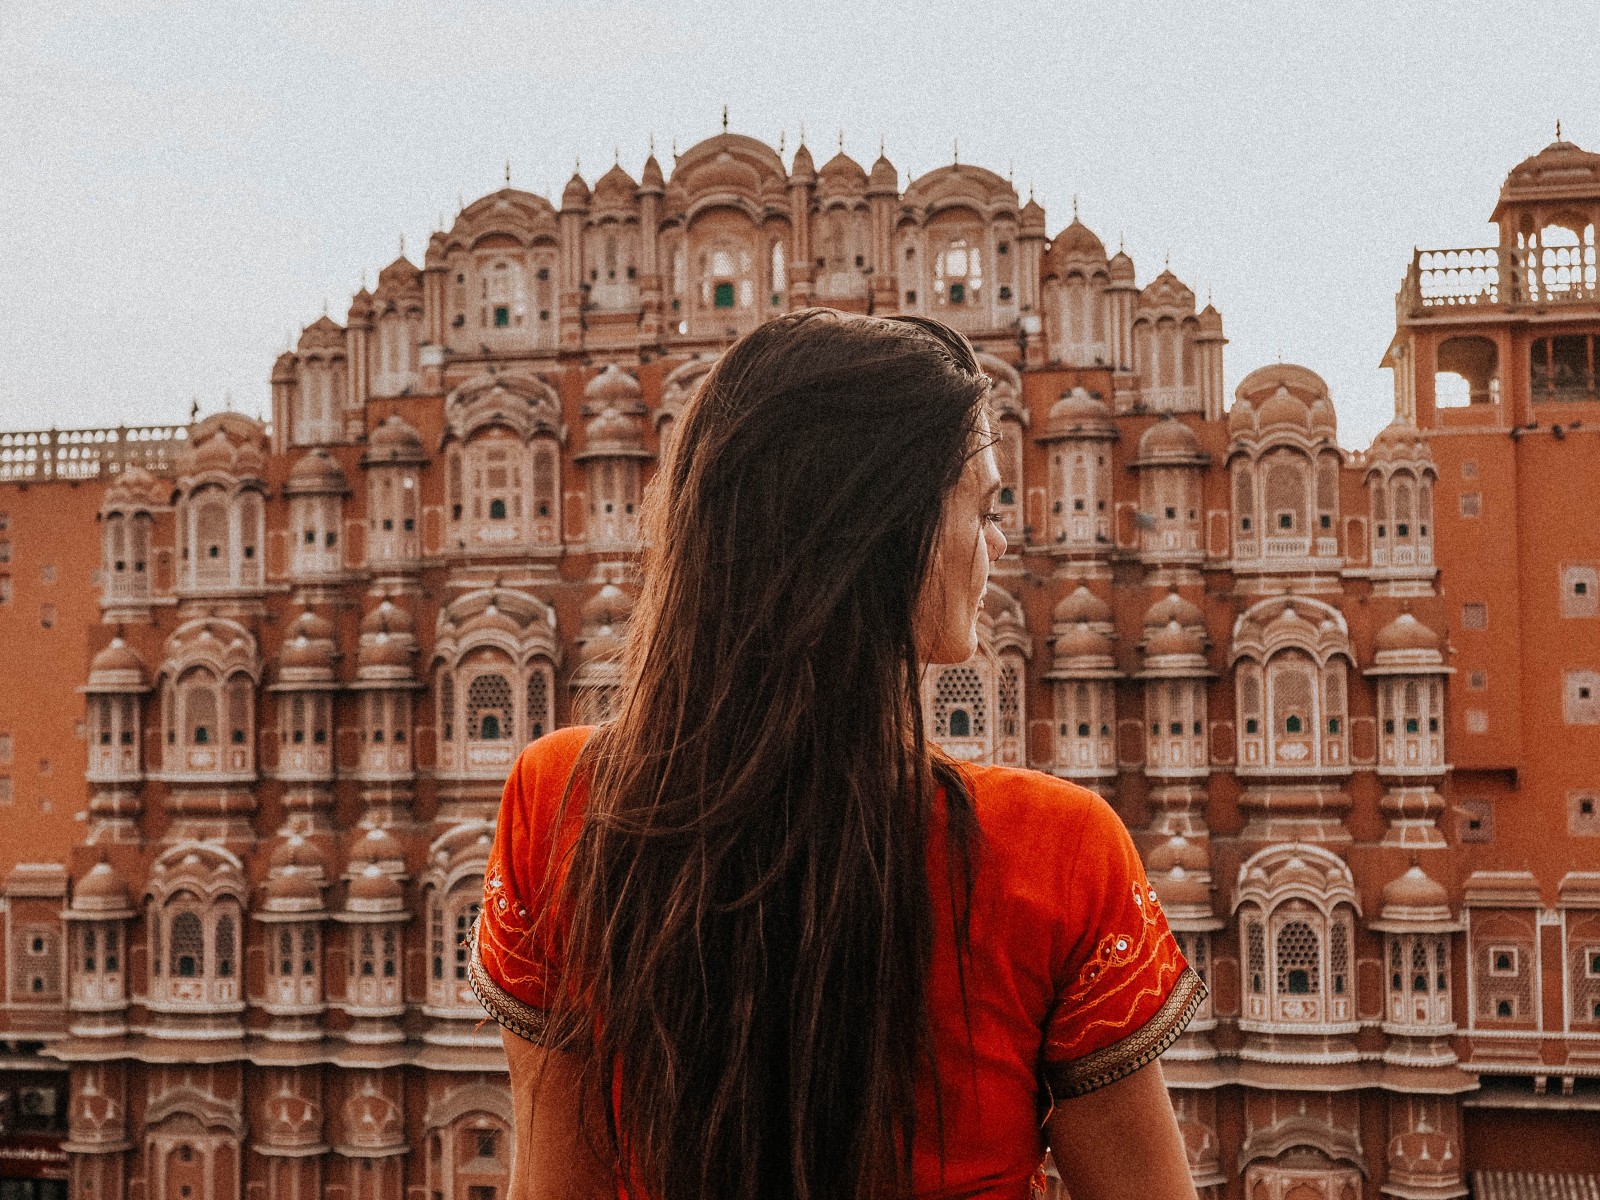 A girl standing in the front of Hawa Mahal in Jaipur